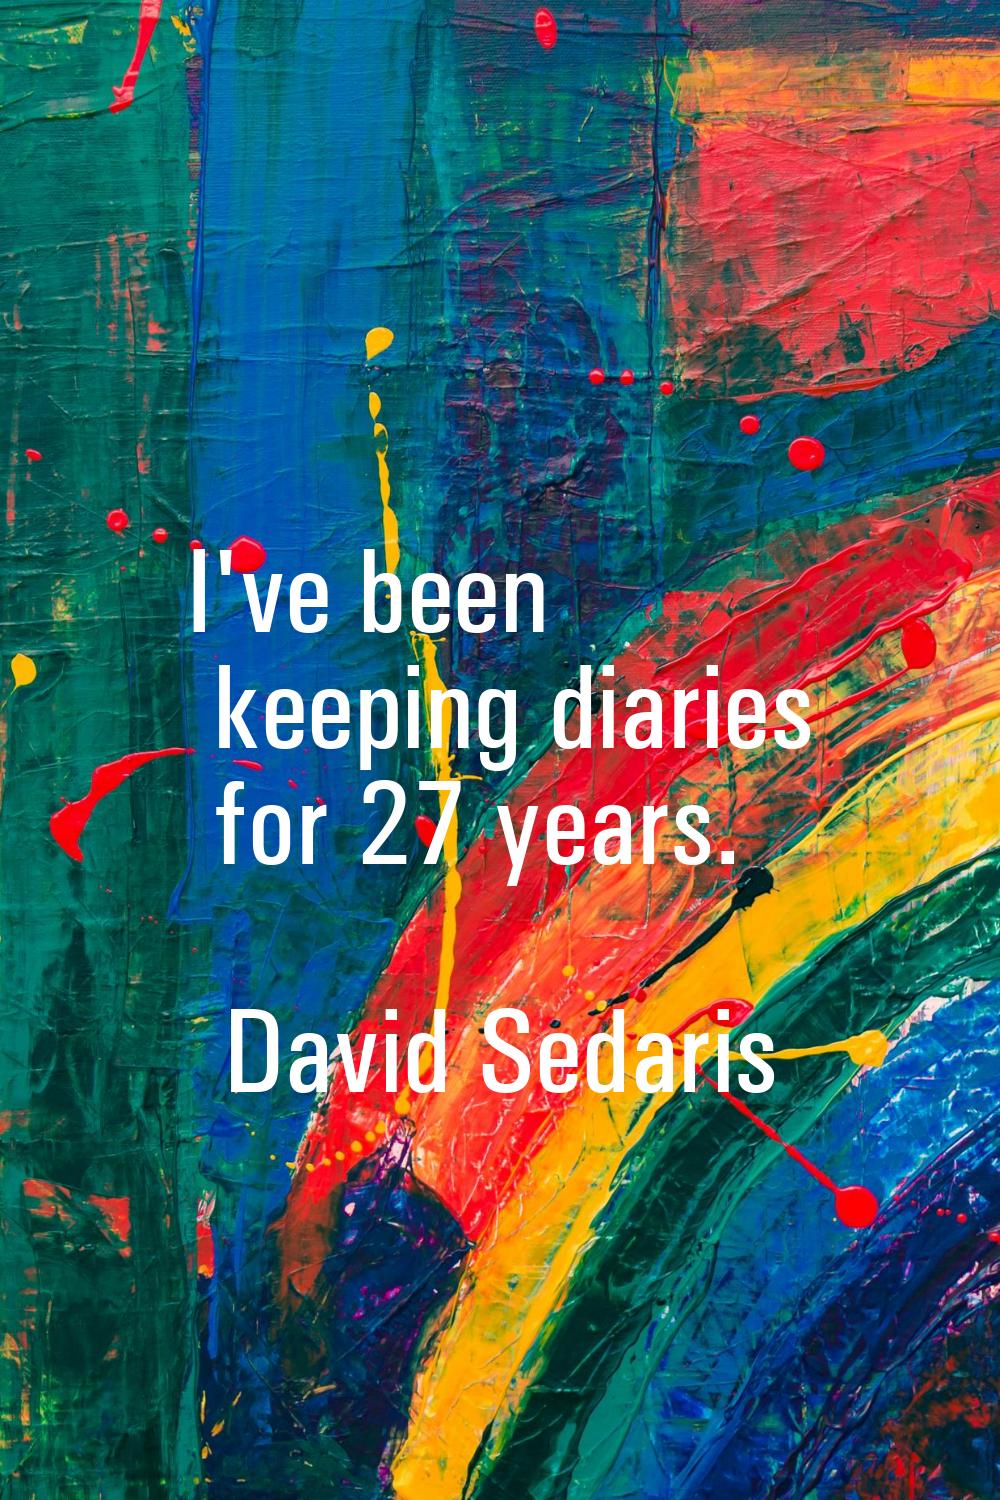 I've been keeping diaries for 27 years.